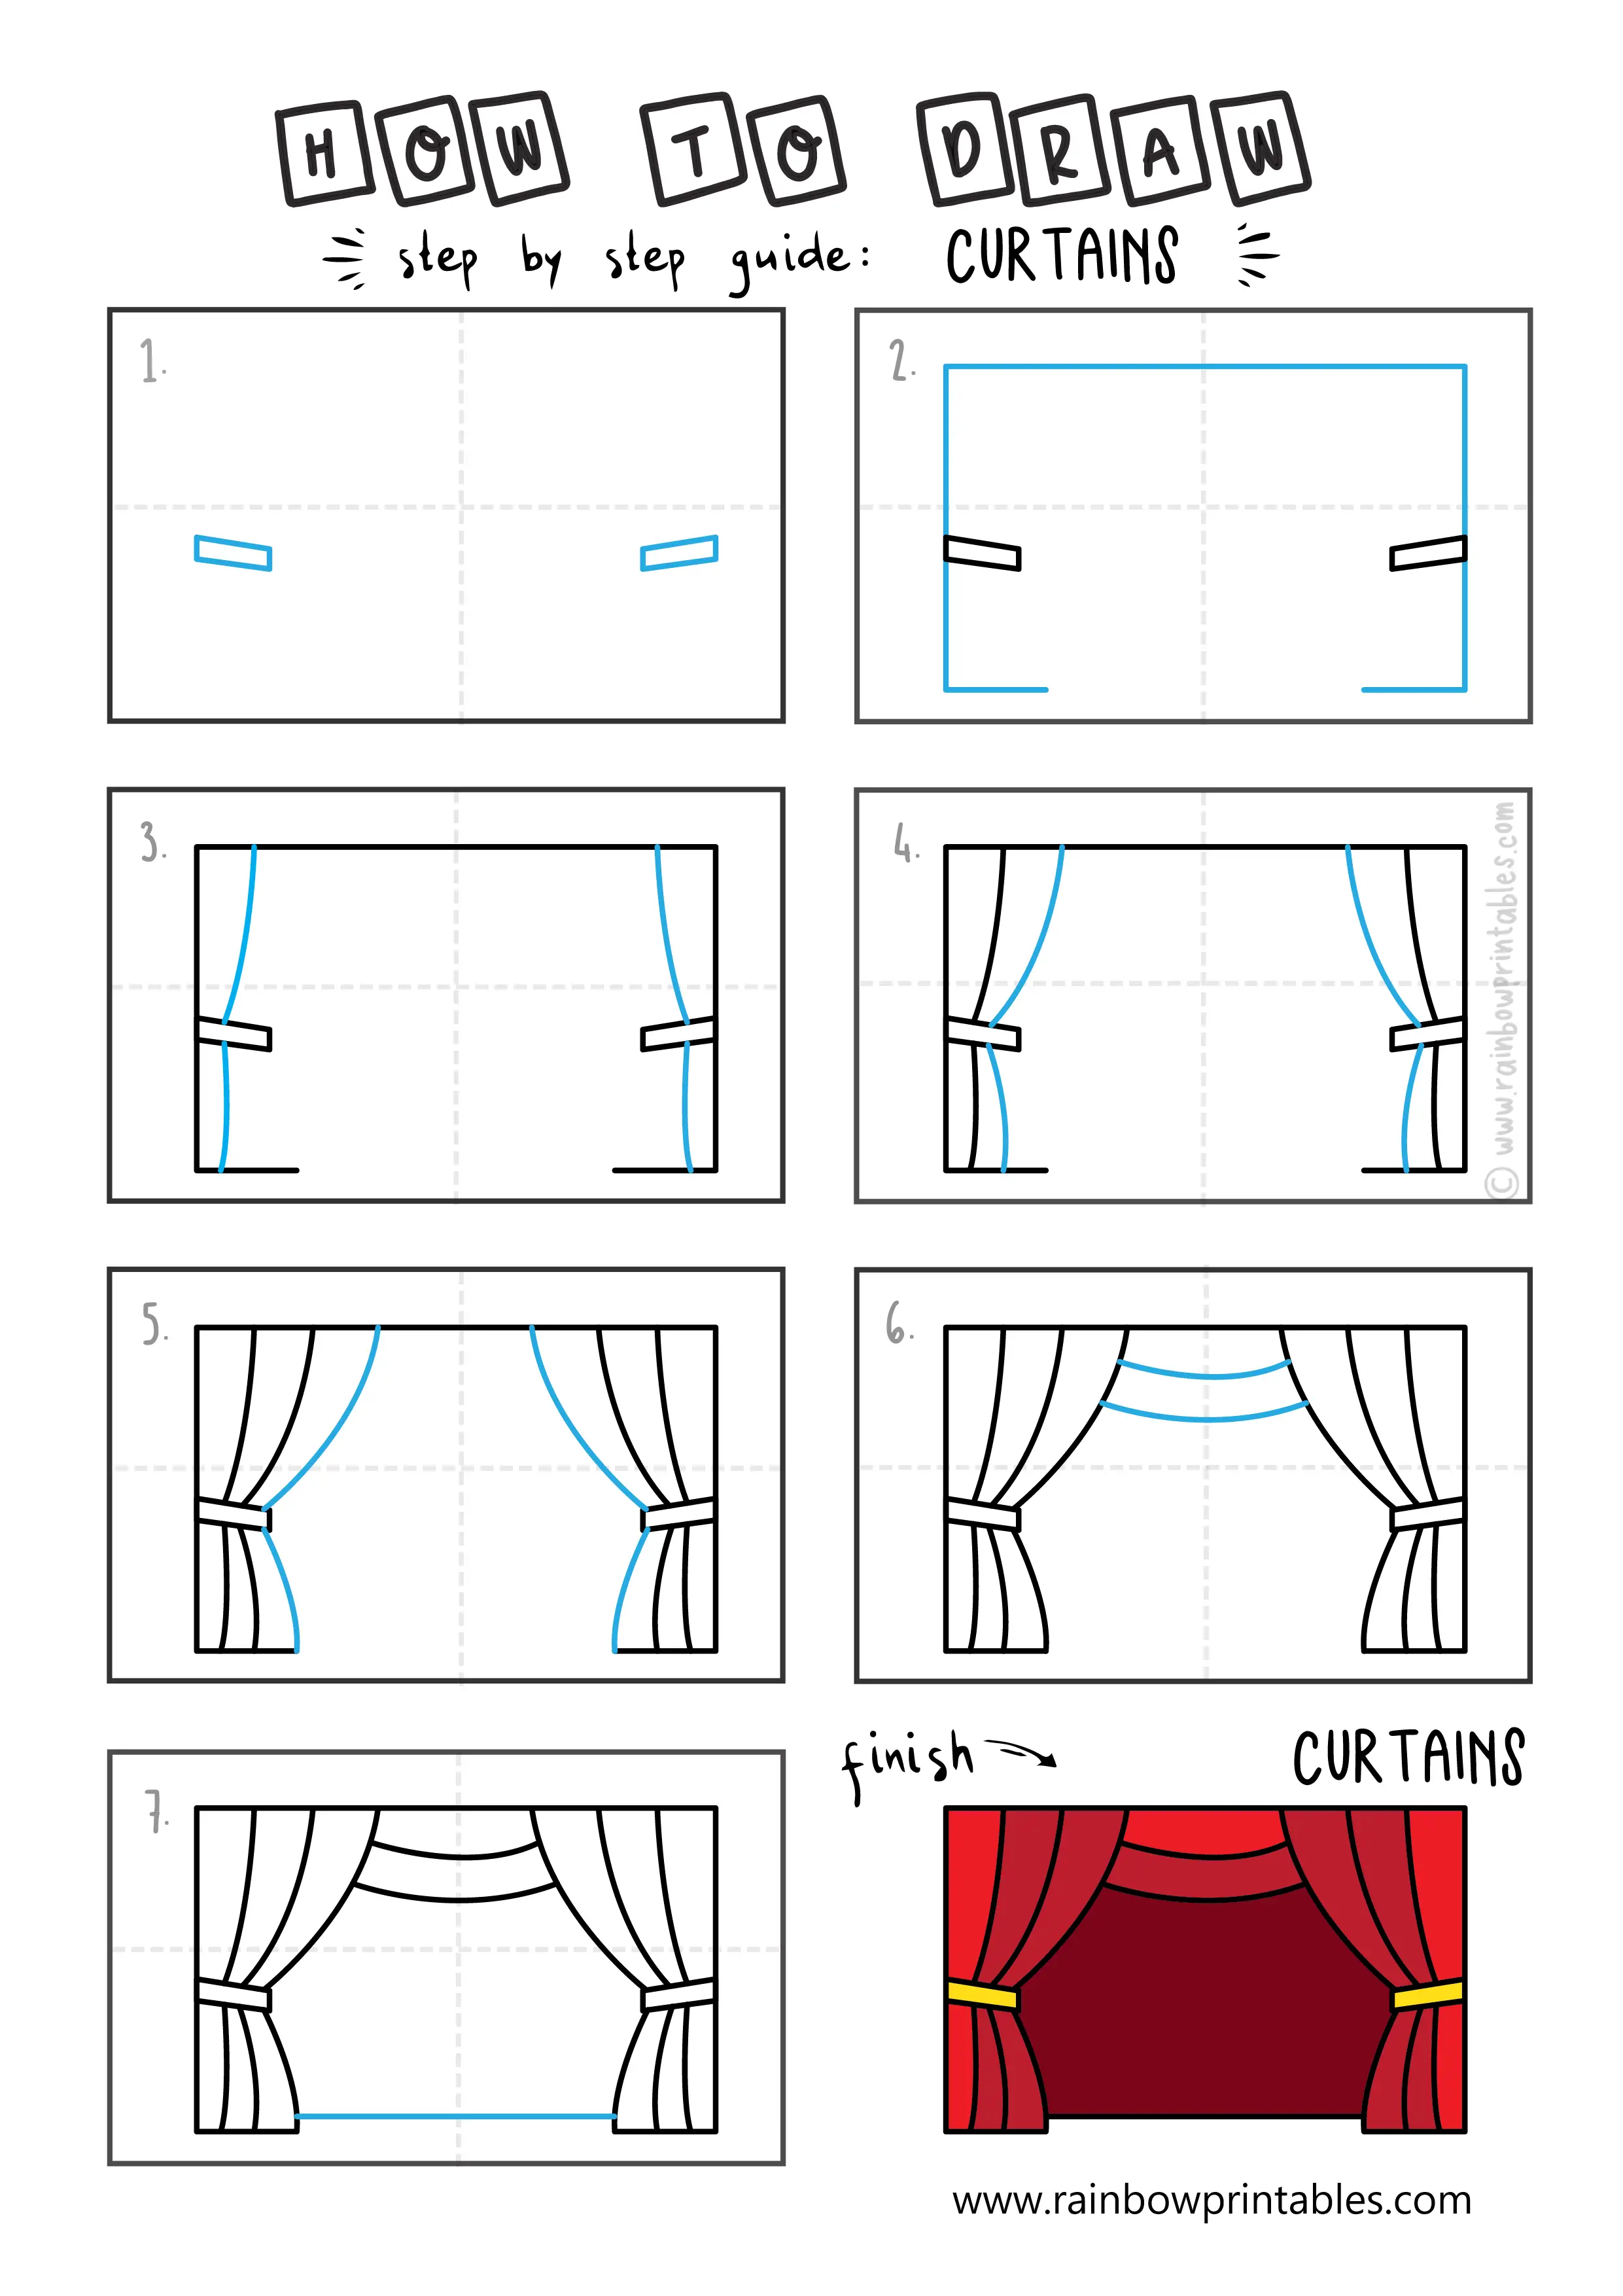 HOW TO DRAW RED STAGE CURTAINS ILLUSTRATION STEP BY STEP EASY SIMPLE FOR KIDS